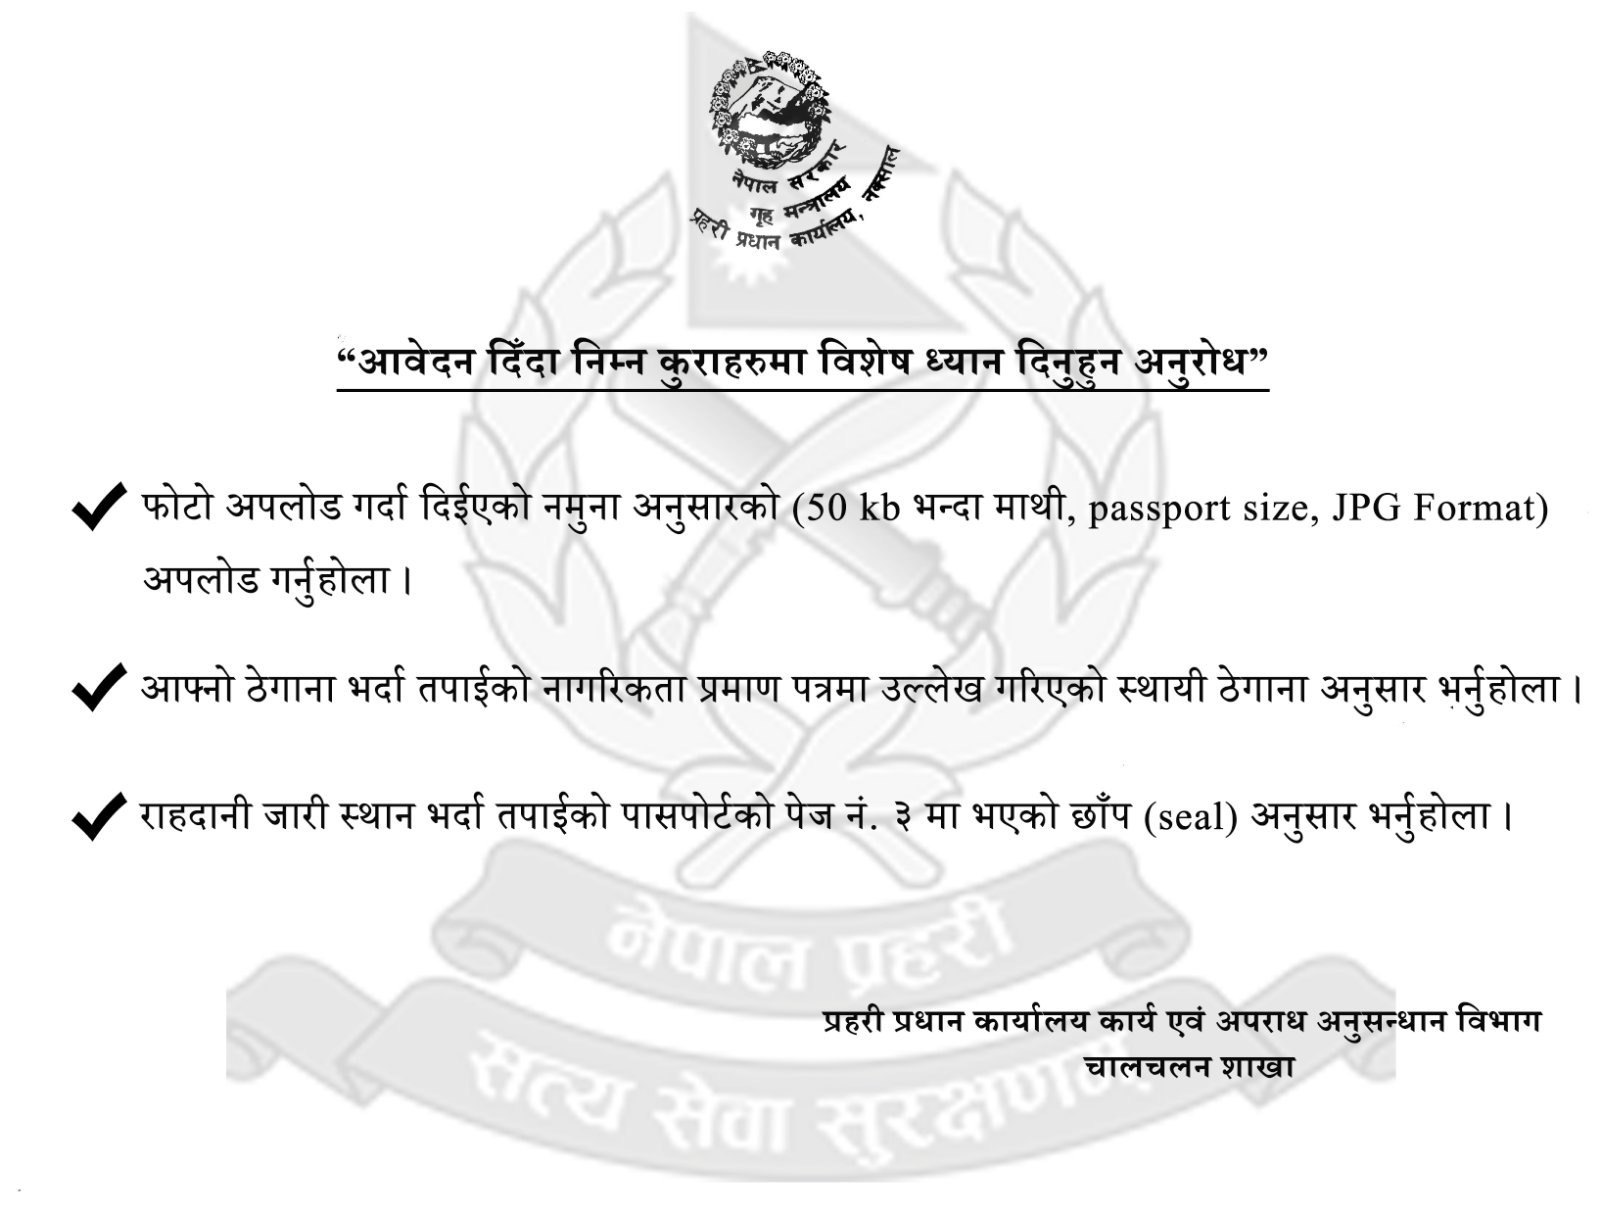 This is how to get a Nepalese Police Clearance Certificate from overseas - NepaliPage